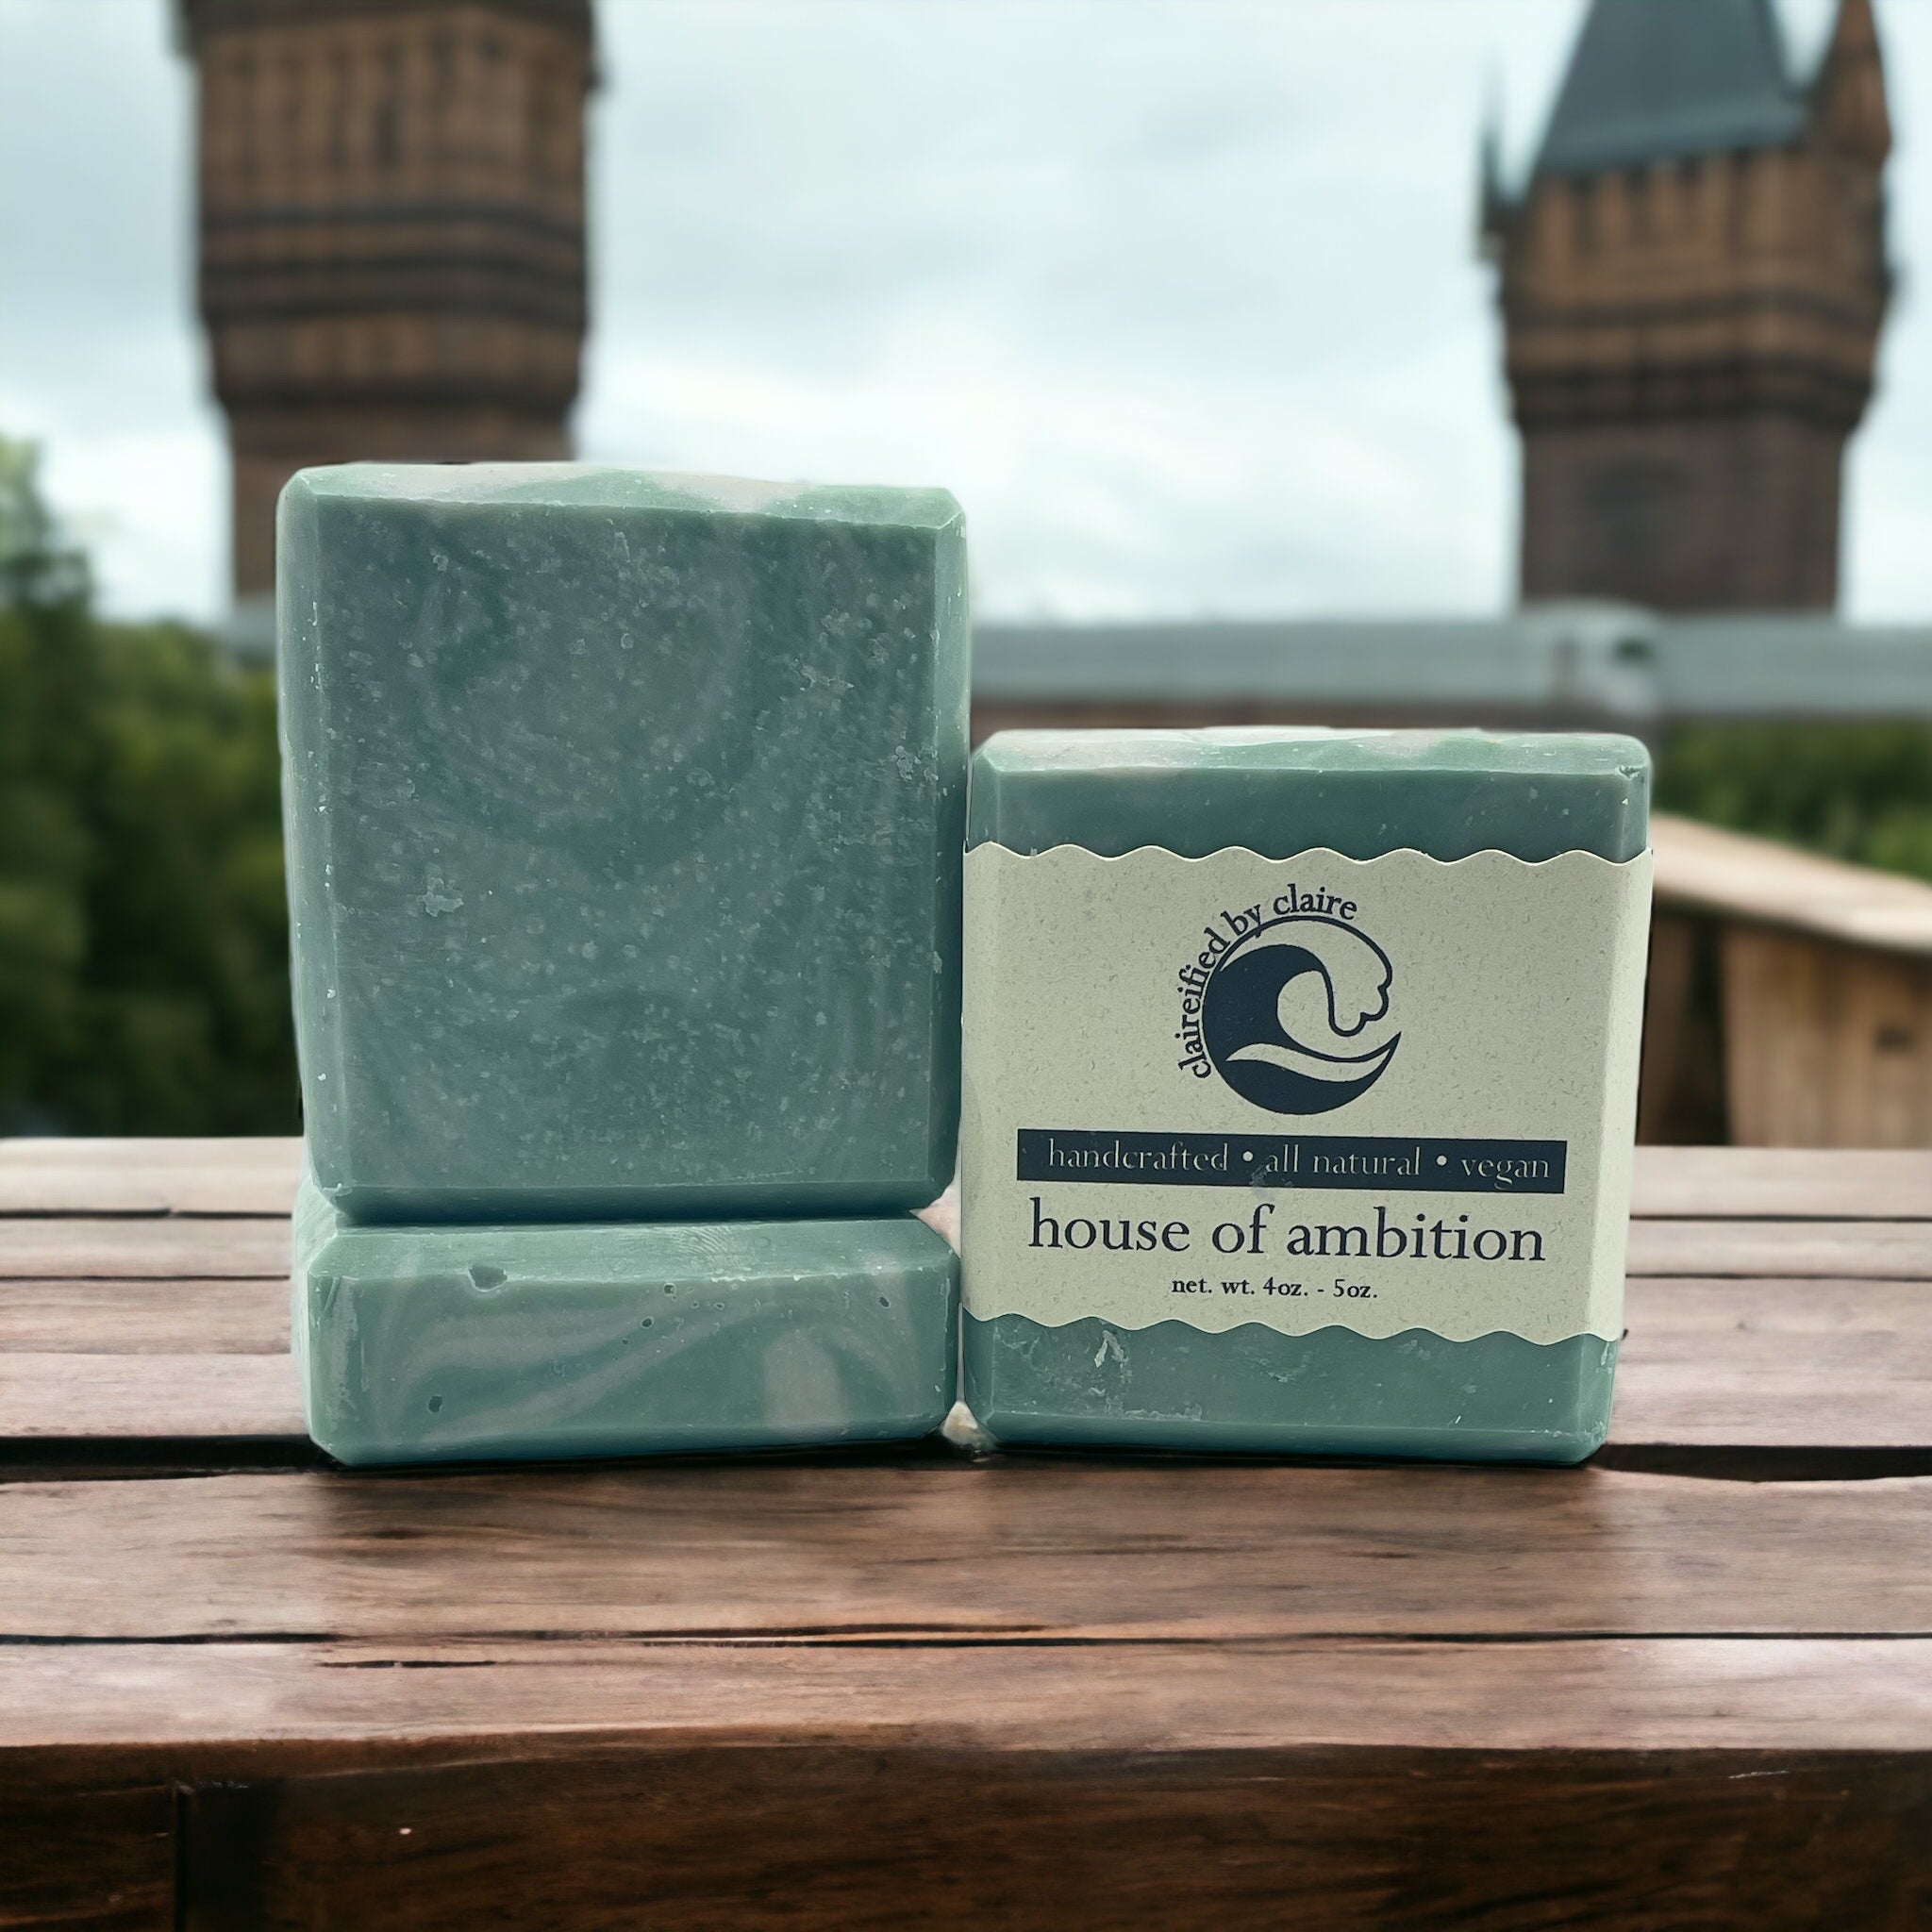 House of Ambition handmade soap inspired by Slytherin house from Harry